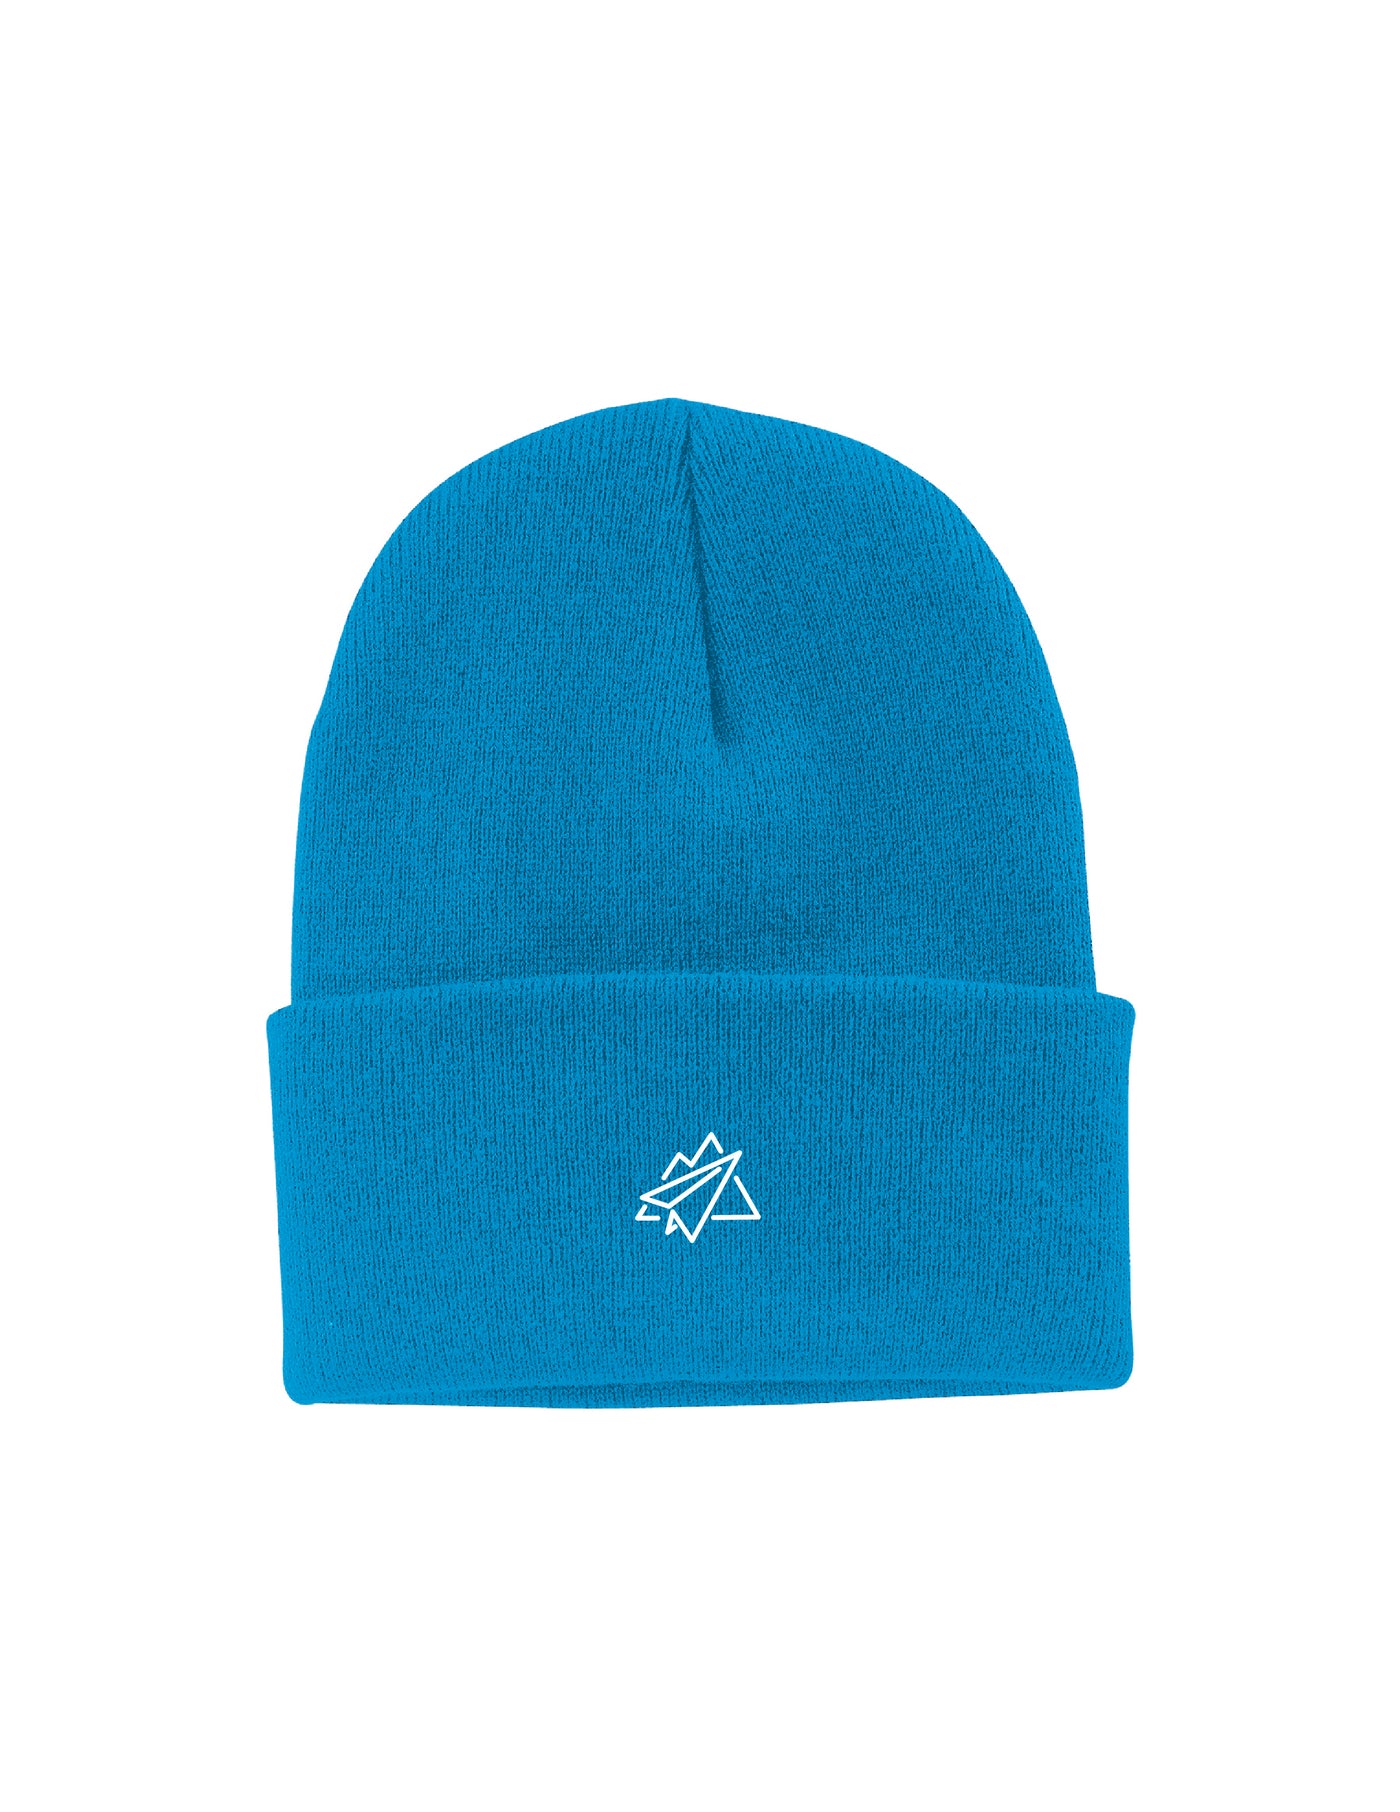 The Nomad Beanie - Neon Blue